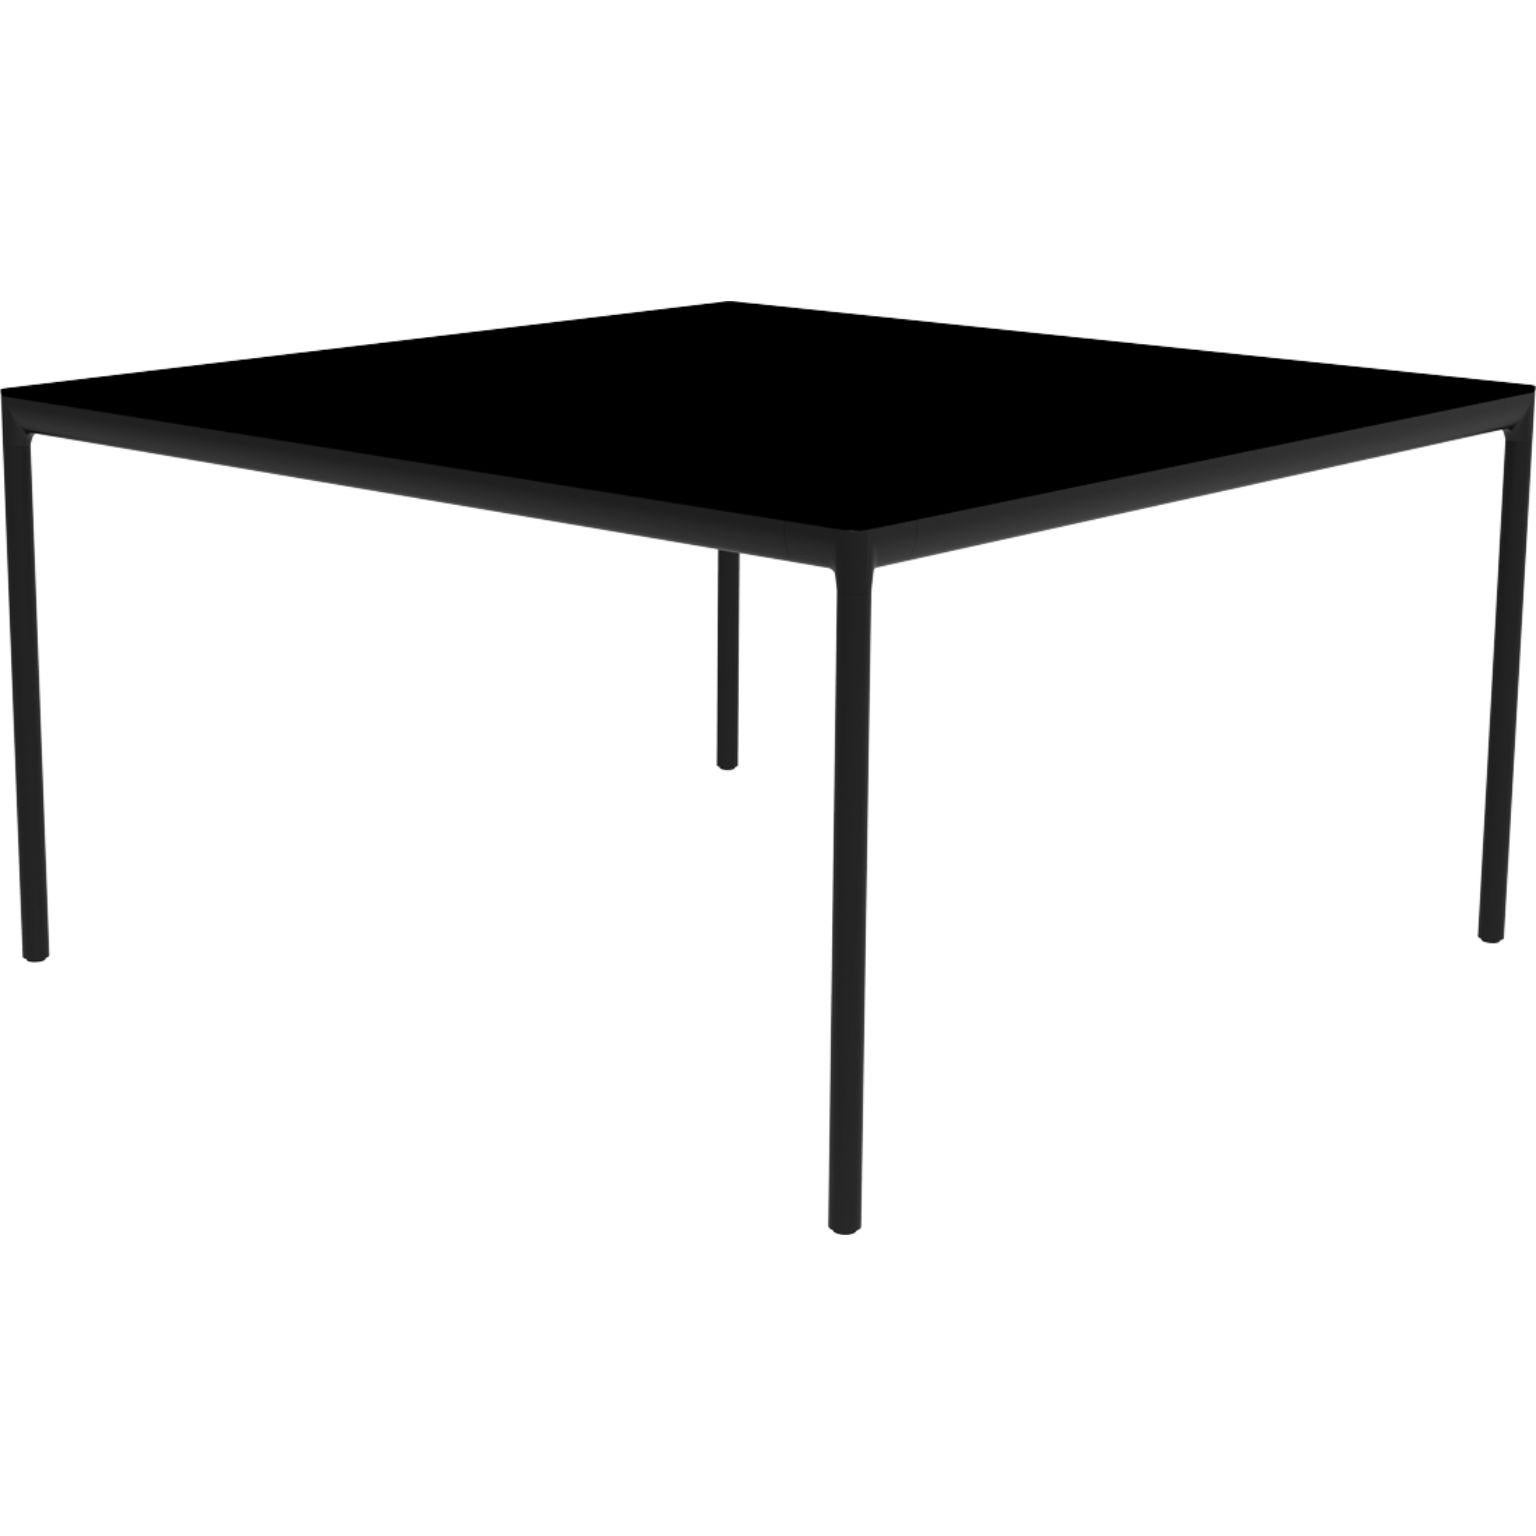 Ribbons black 138 coffee table by MOWEE.
Dimensions: D138 x W138 x H75 cm.
Material: Aluminum and HPL top.
Weight: 23 kg.
Also available in different colors and finishes. (HPL Black Edge or Neolith top).

An unmistakable collection for its